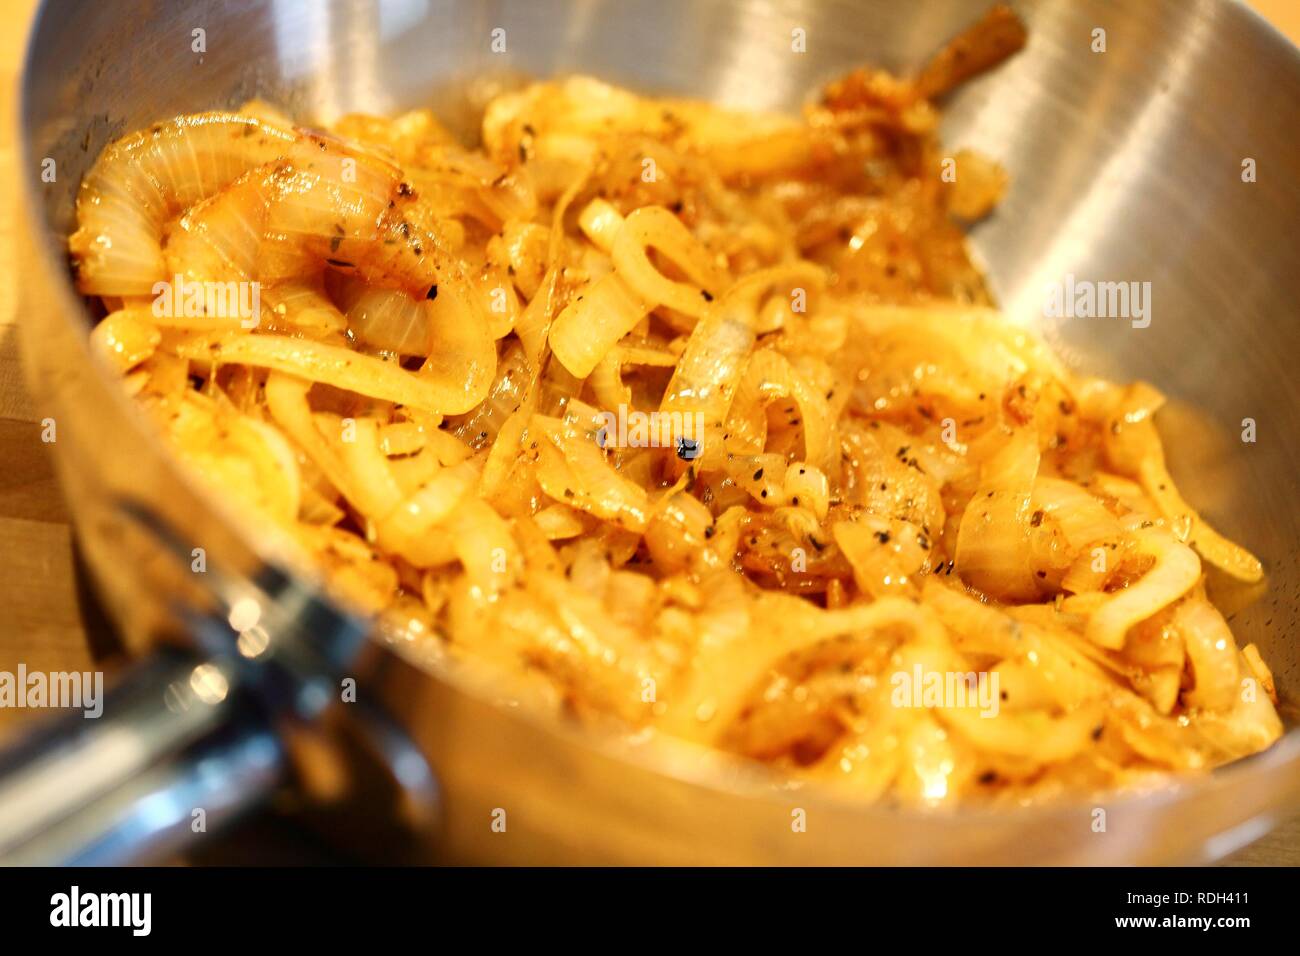 Braised onions in a sauté pan Stock Photo